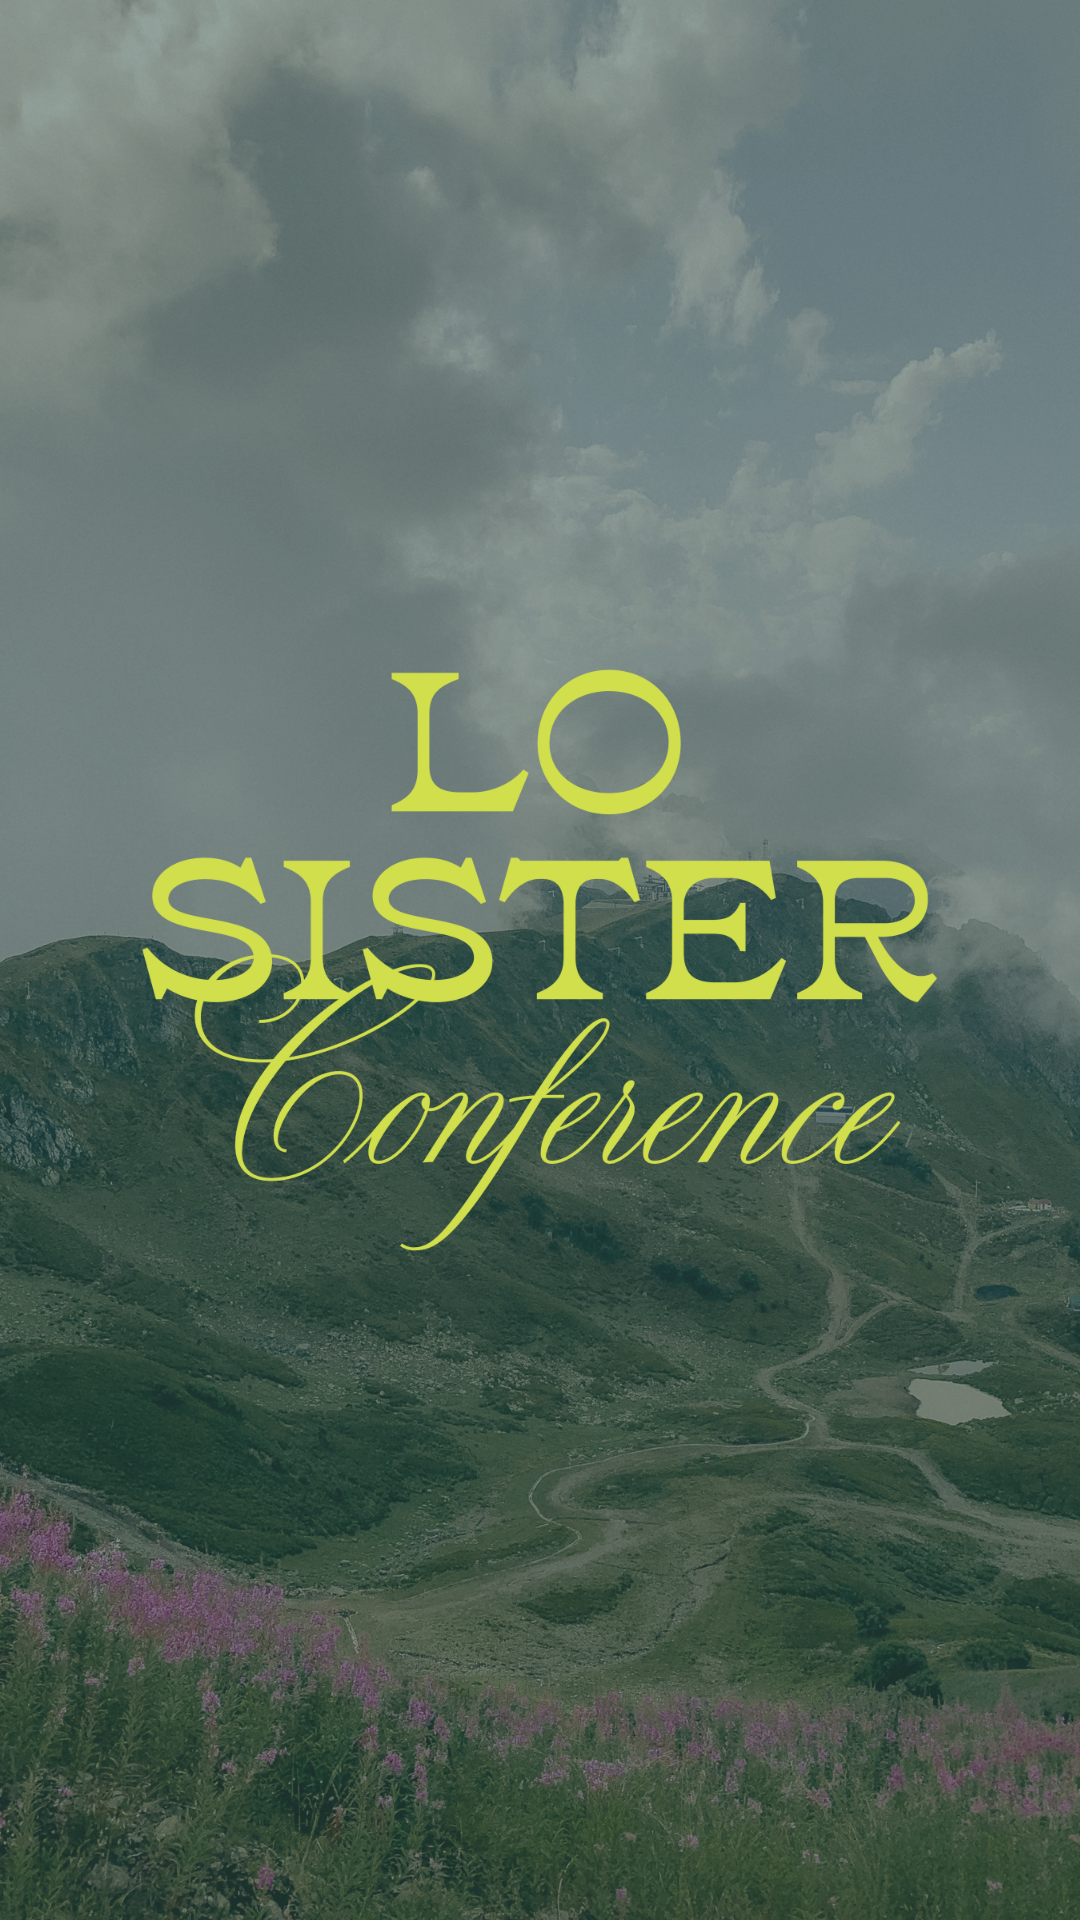 LO sister conference launch reel (2).png